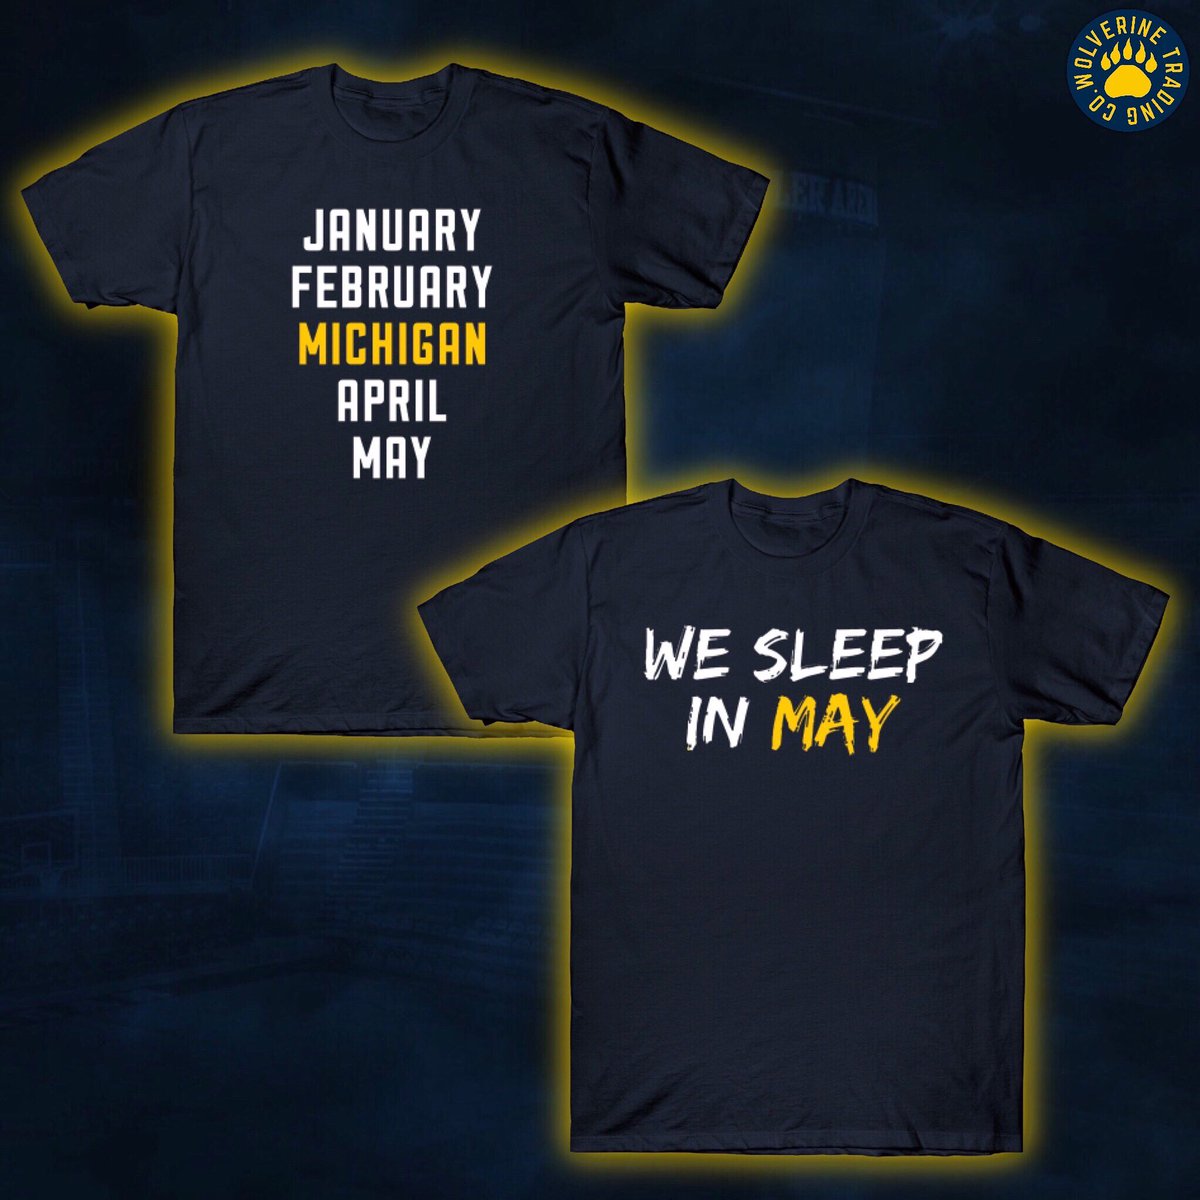 Happy March everyone! Gear up to cheer on the Men’s and Women’s team this post season! Link in bio! #GoBlue #MichiganBasketball